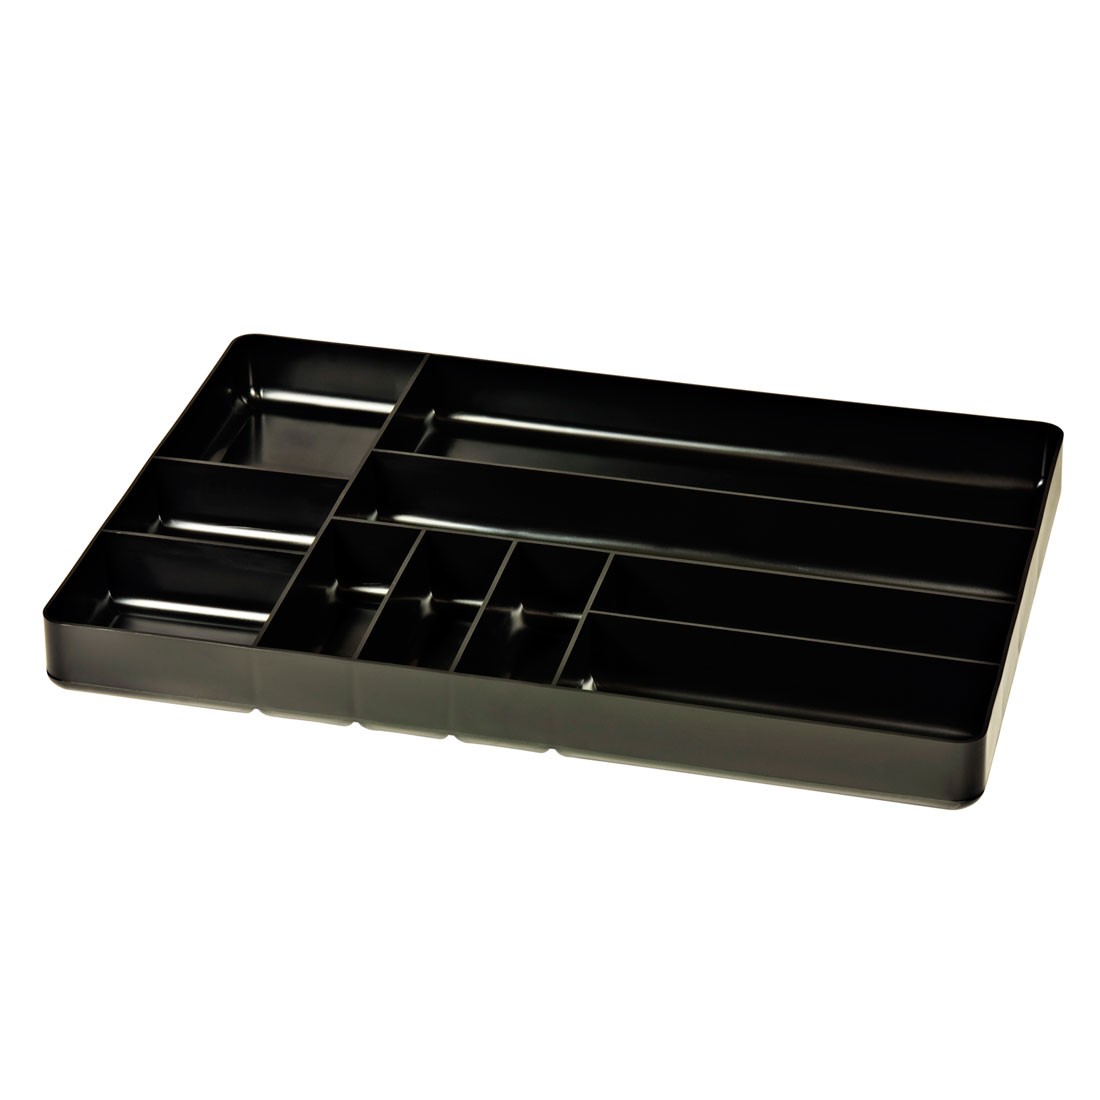 http://www.ernstmfg.com/shared/images/product/5011_ten-compartment-organizer-tray_black-1100_1.jpg